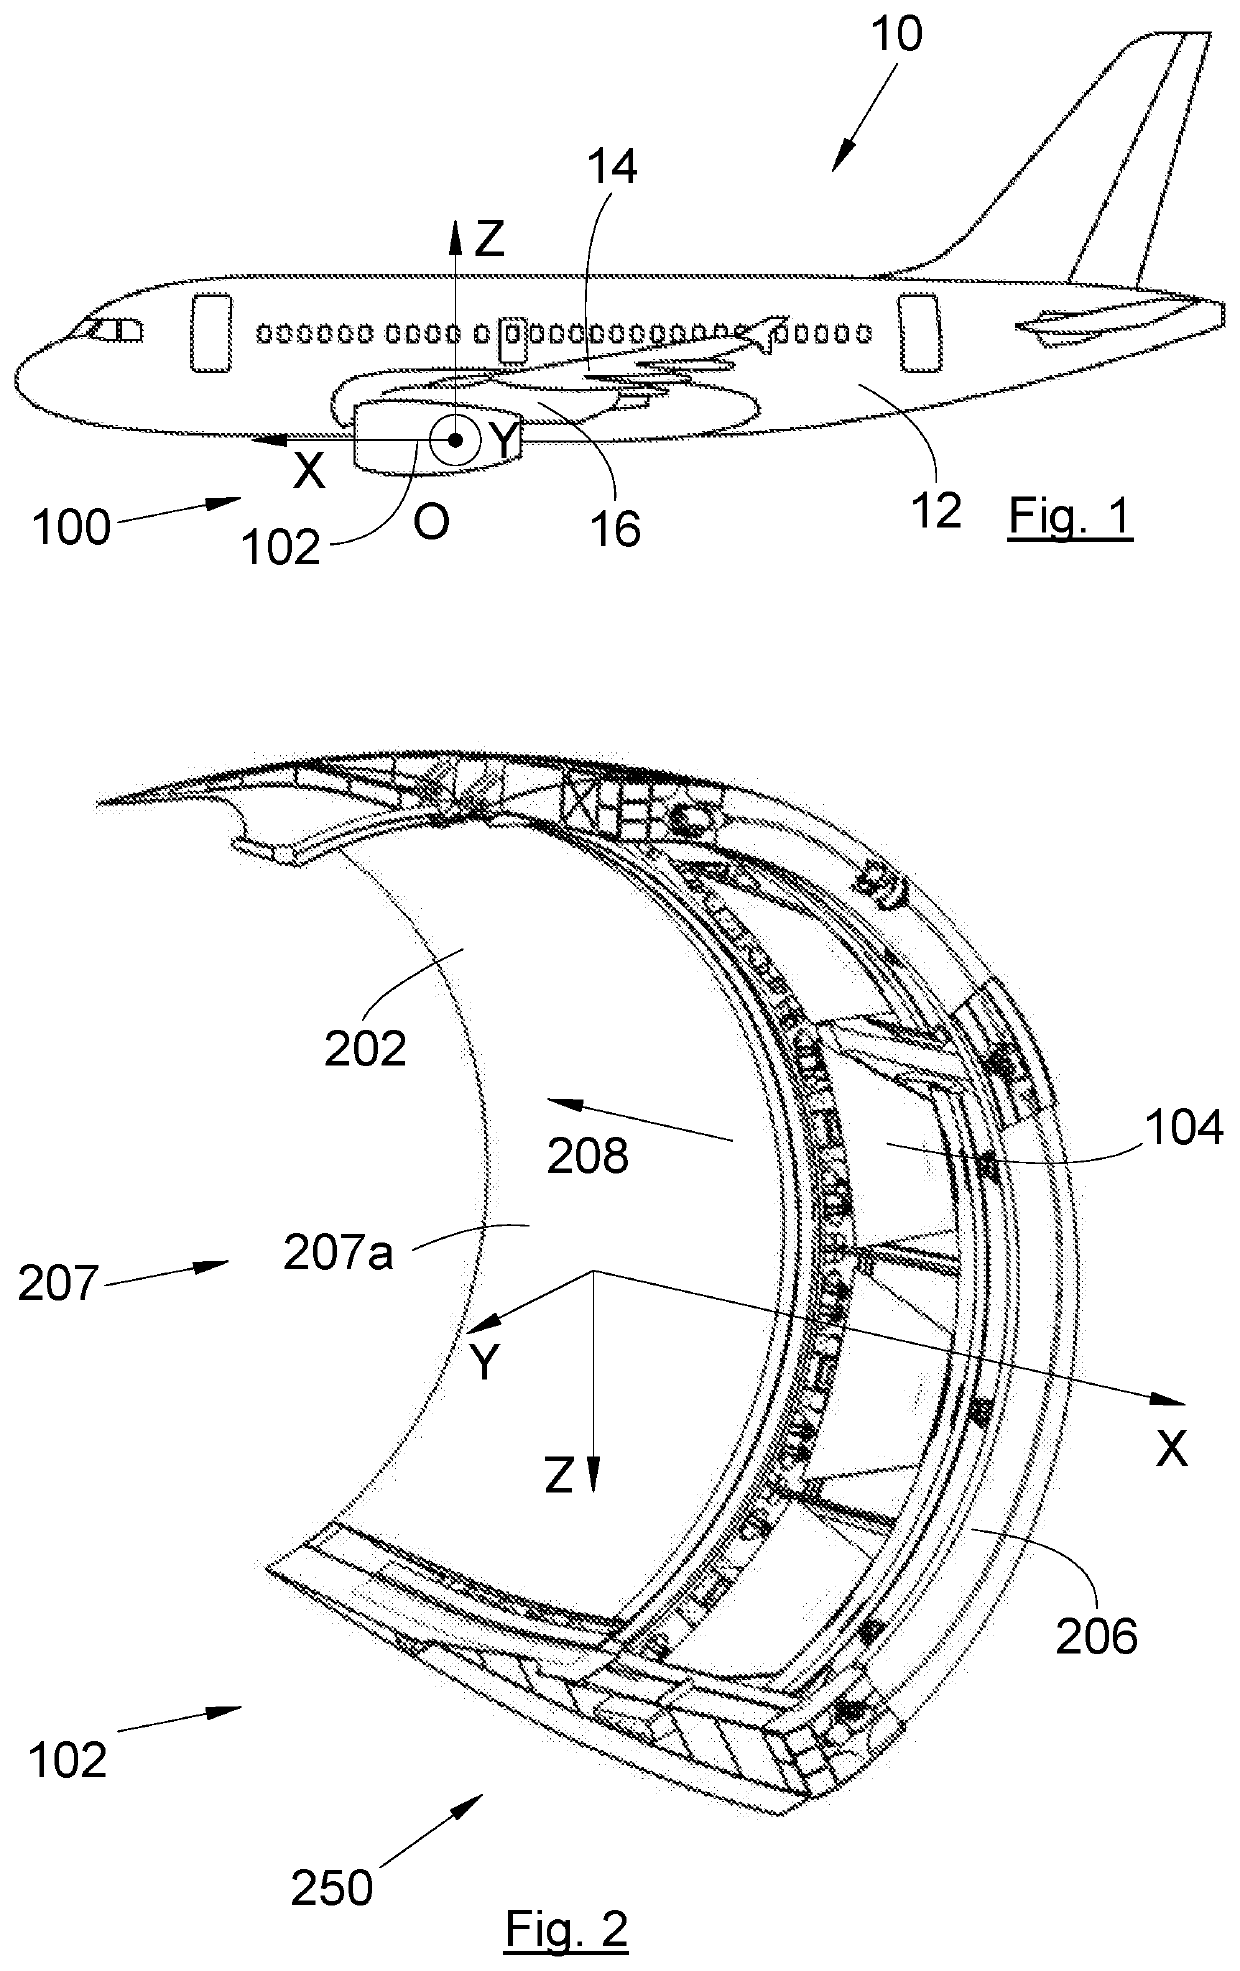 Jet engine comprising a nacelle equipped with a thrust reversing system comprising doors